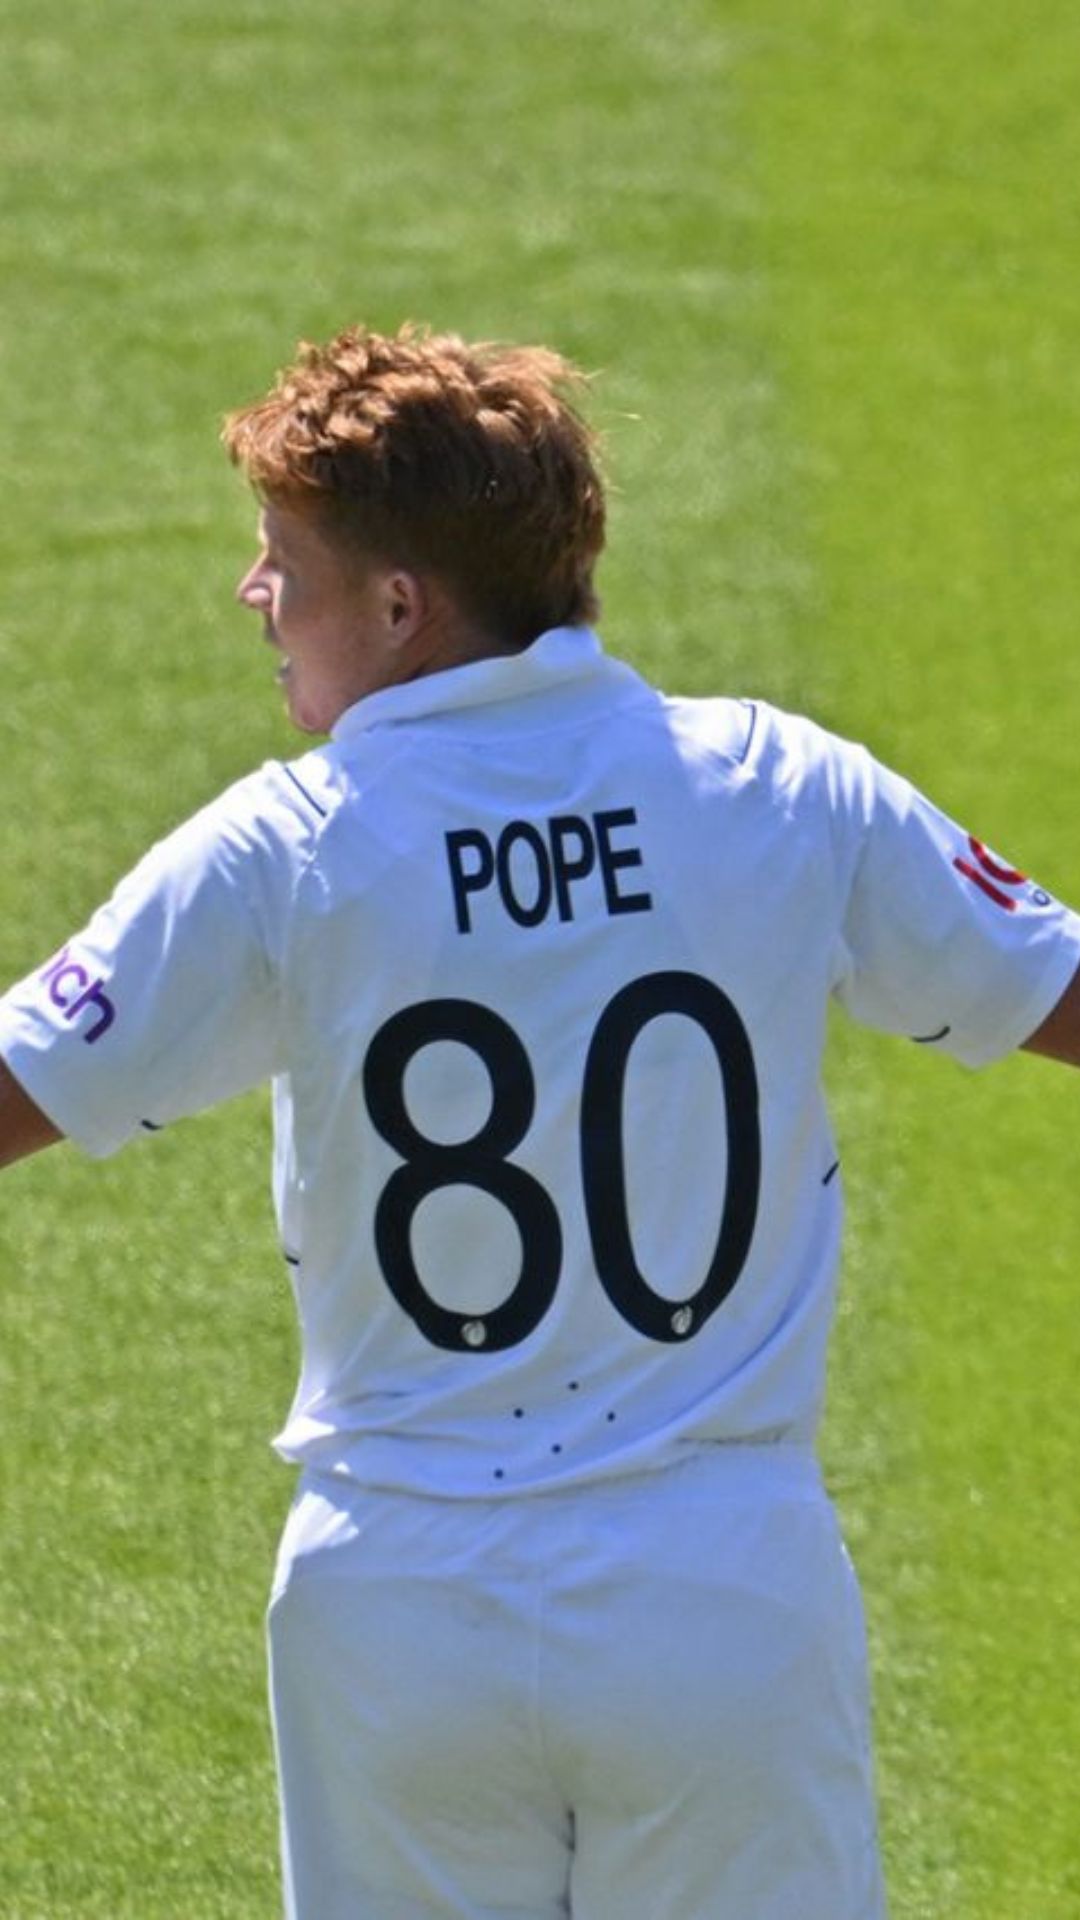 Top 10 cricketers with fastest double hundreds in Test cricket, Ollie Pope jumps to seventh